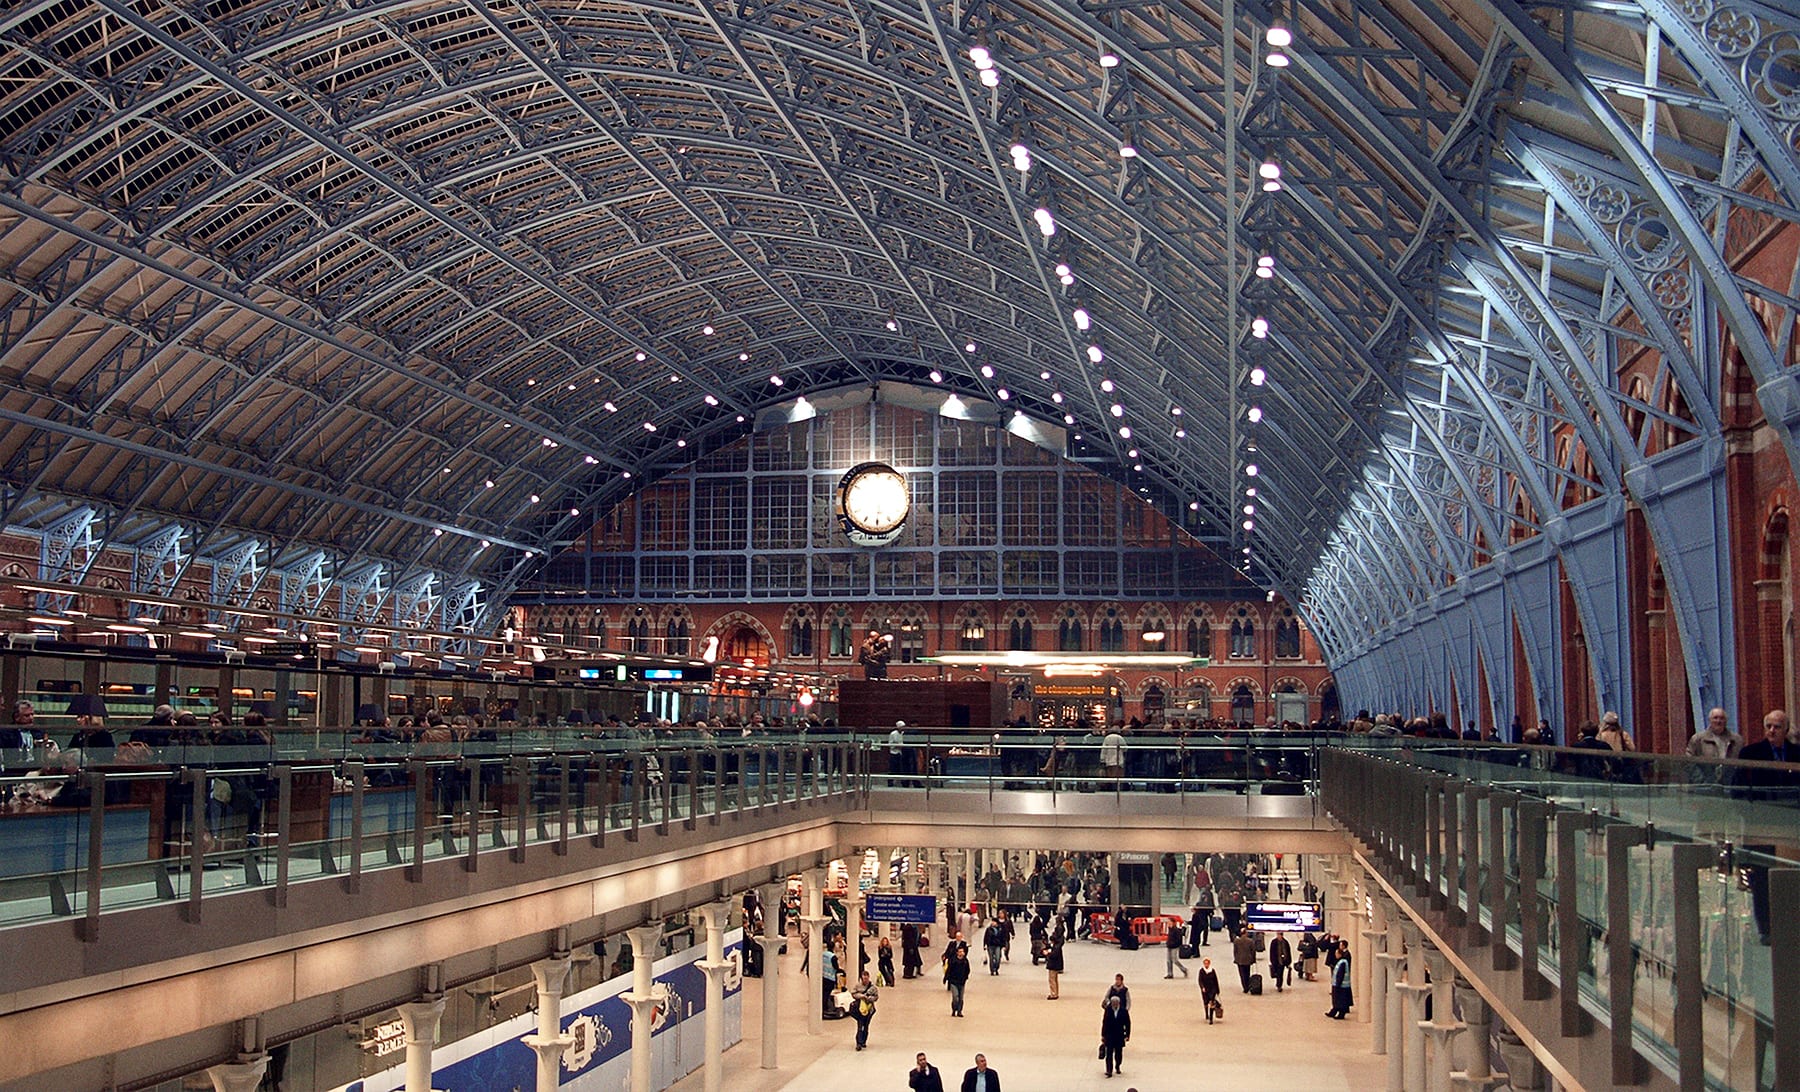 An Inside Look at St. Pancras Station